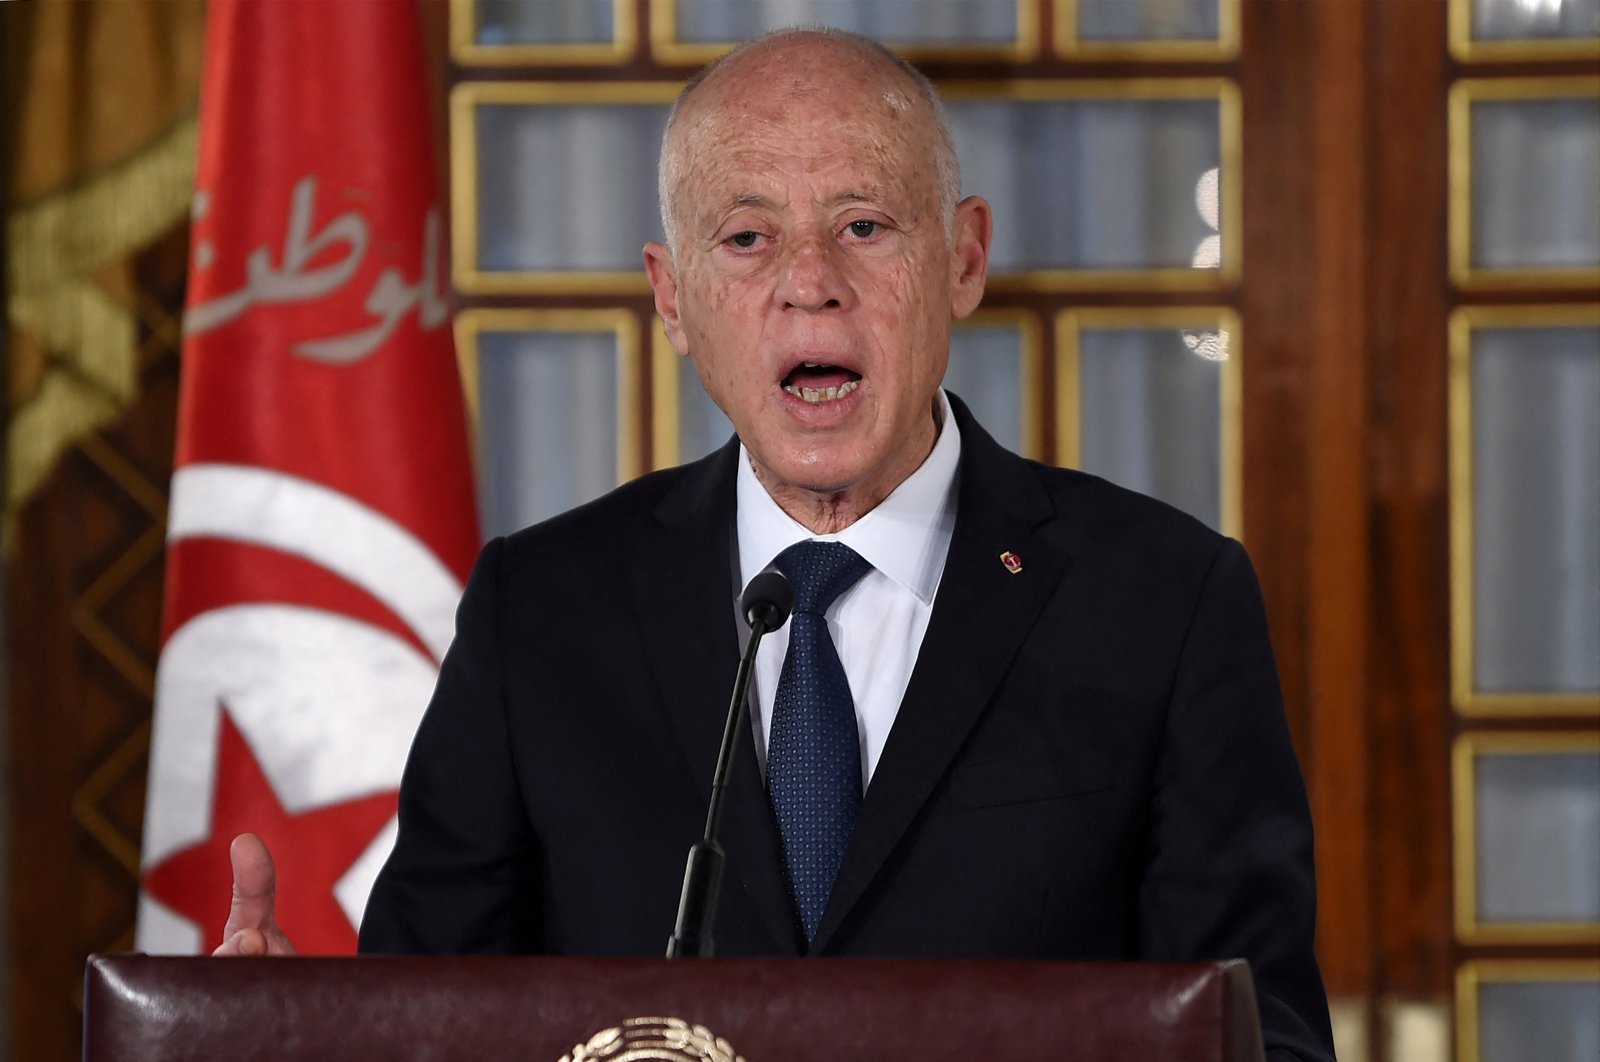 Tunisian President Saied is cementing power